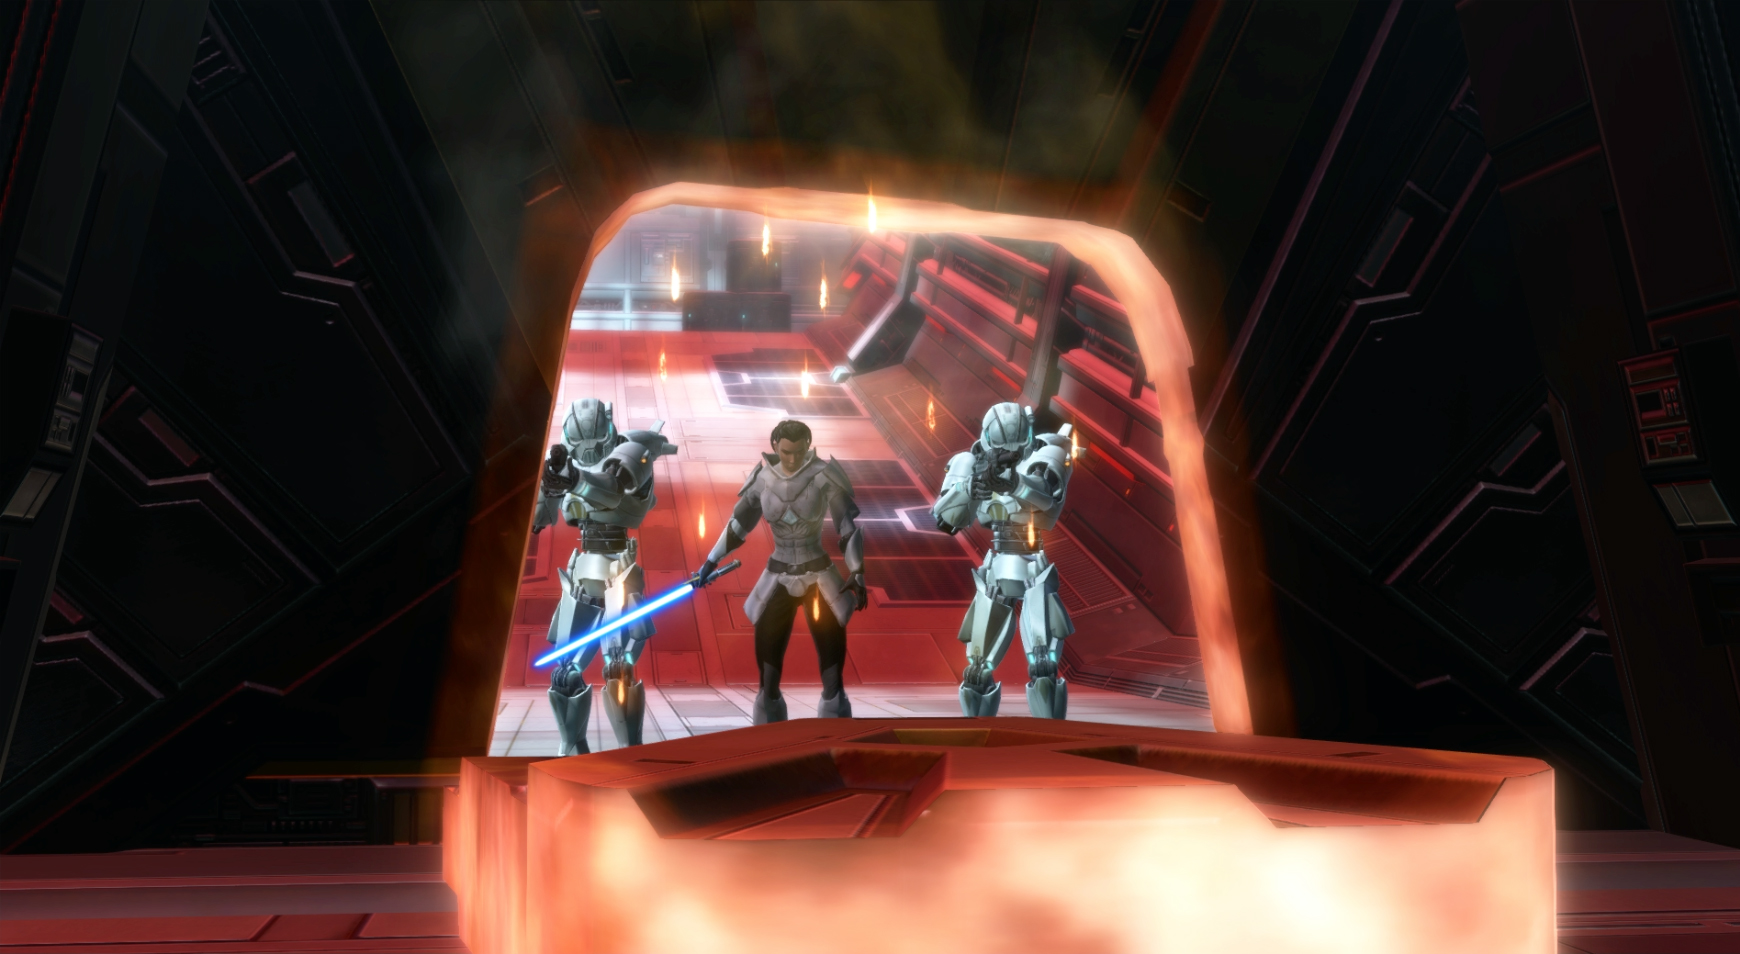 swtor kotfe profitandplunder breakingin Star Wars: The Old Republic - Knights of the Fallen Empire "Profit and Plunder" Released